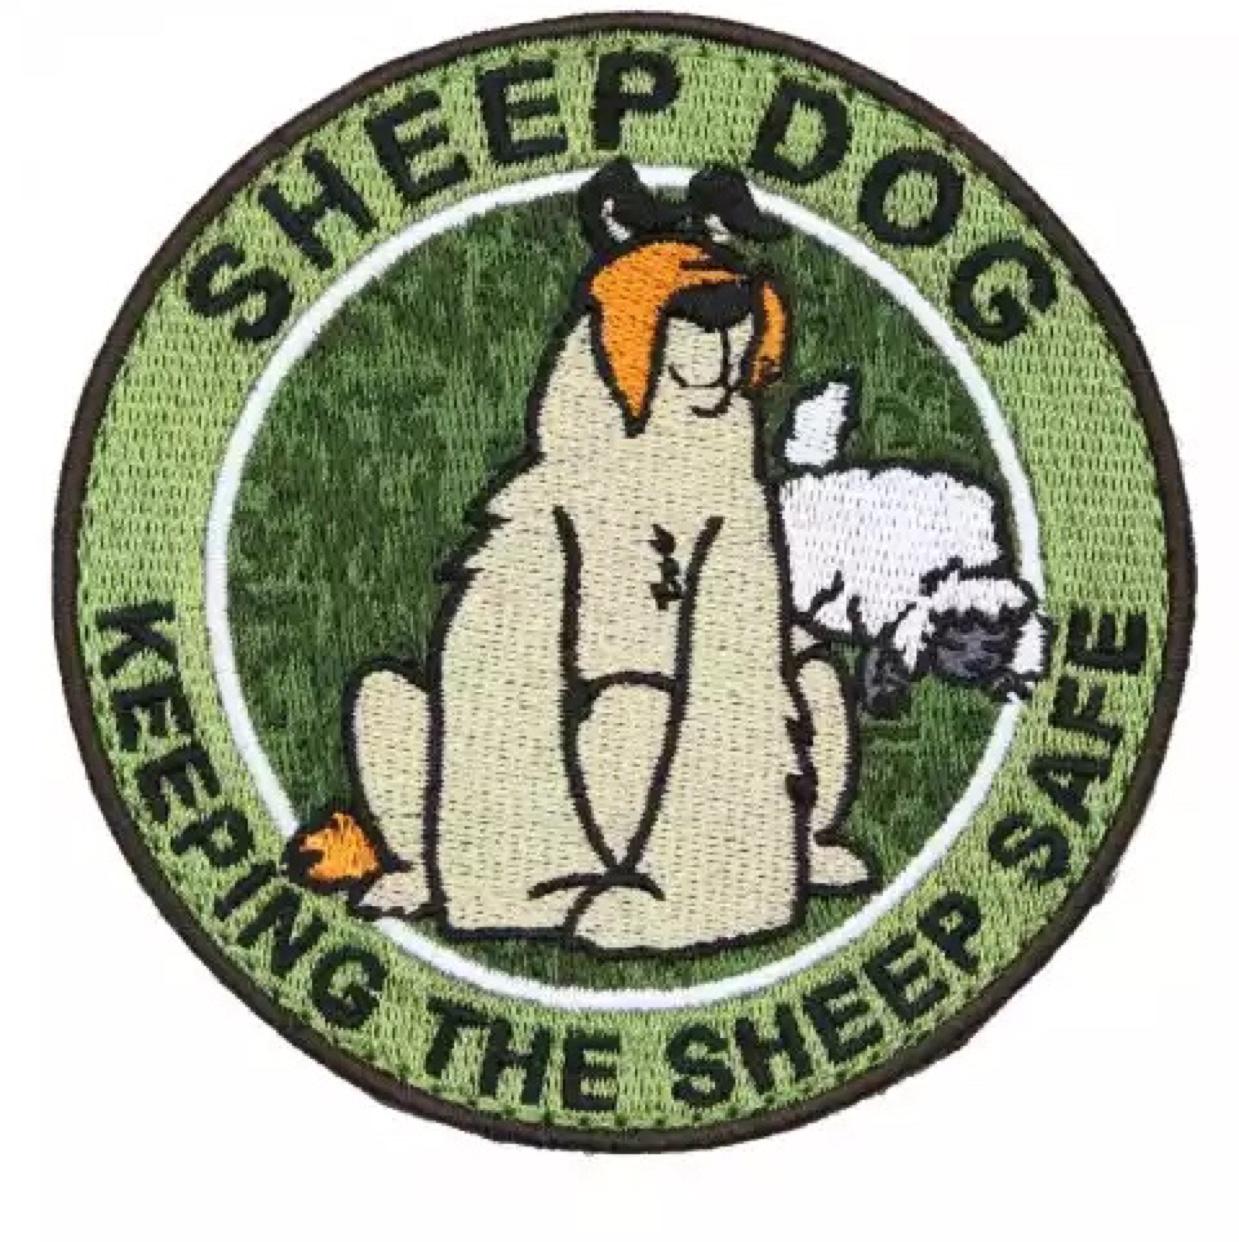 People don't know about the things I say and do, They don't understand about the shit that I've been through. Sheepdog.